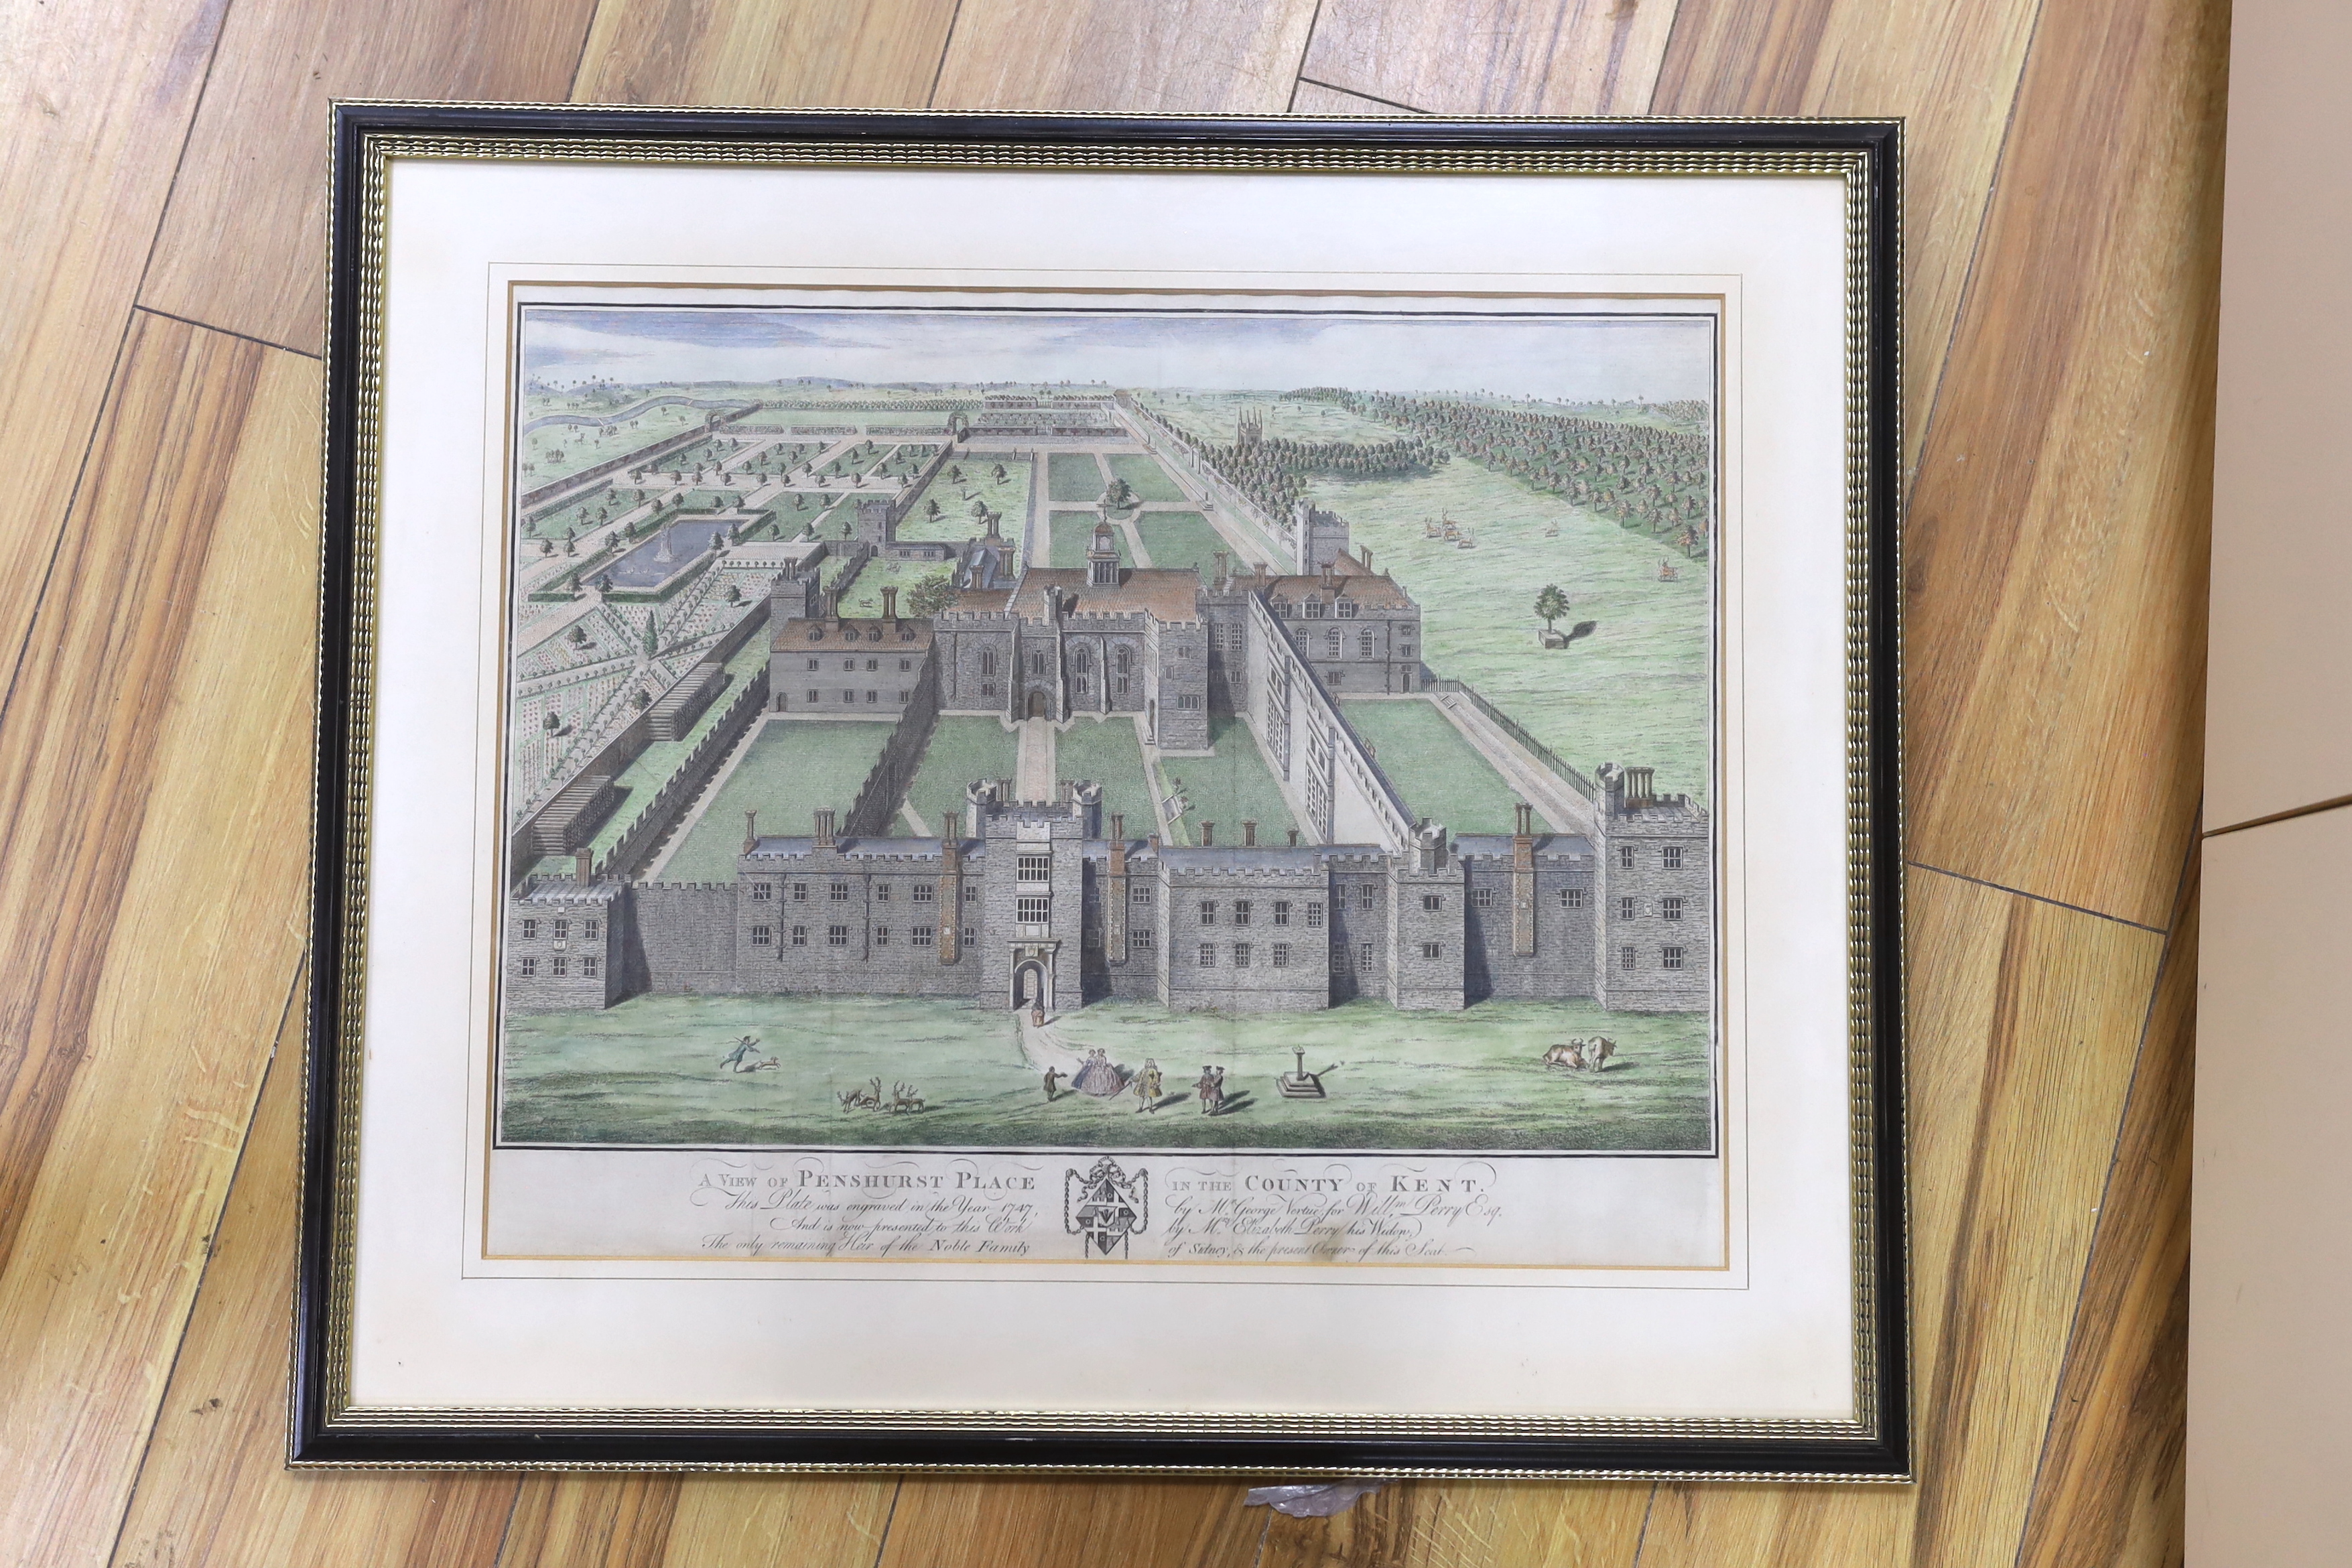 George Virtue (1798-1868) for William Perry, coloured engraving, A view of Penshurst Place in the - Image 2 of 2